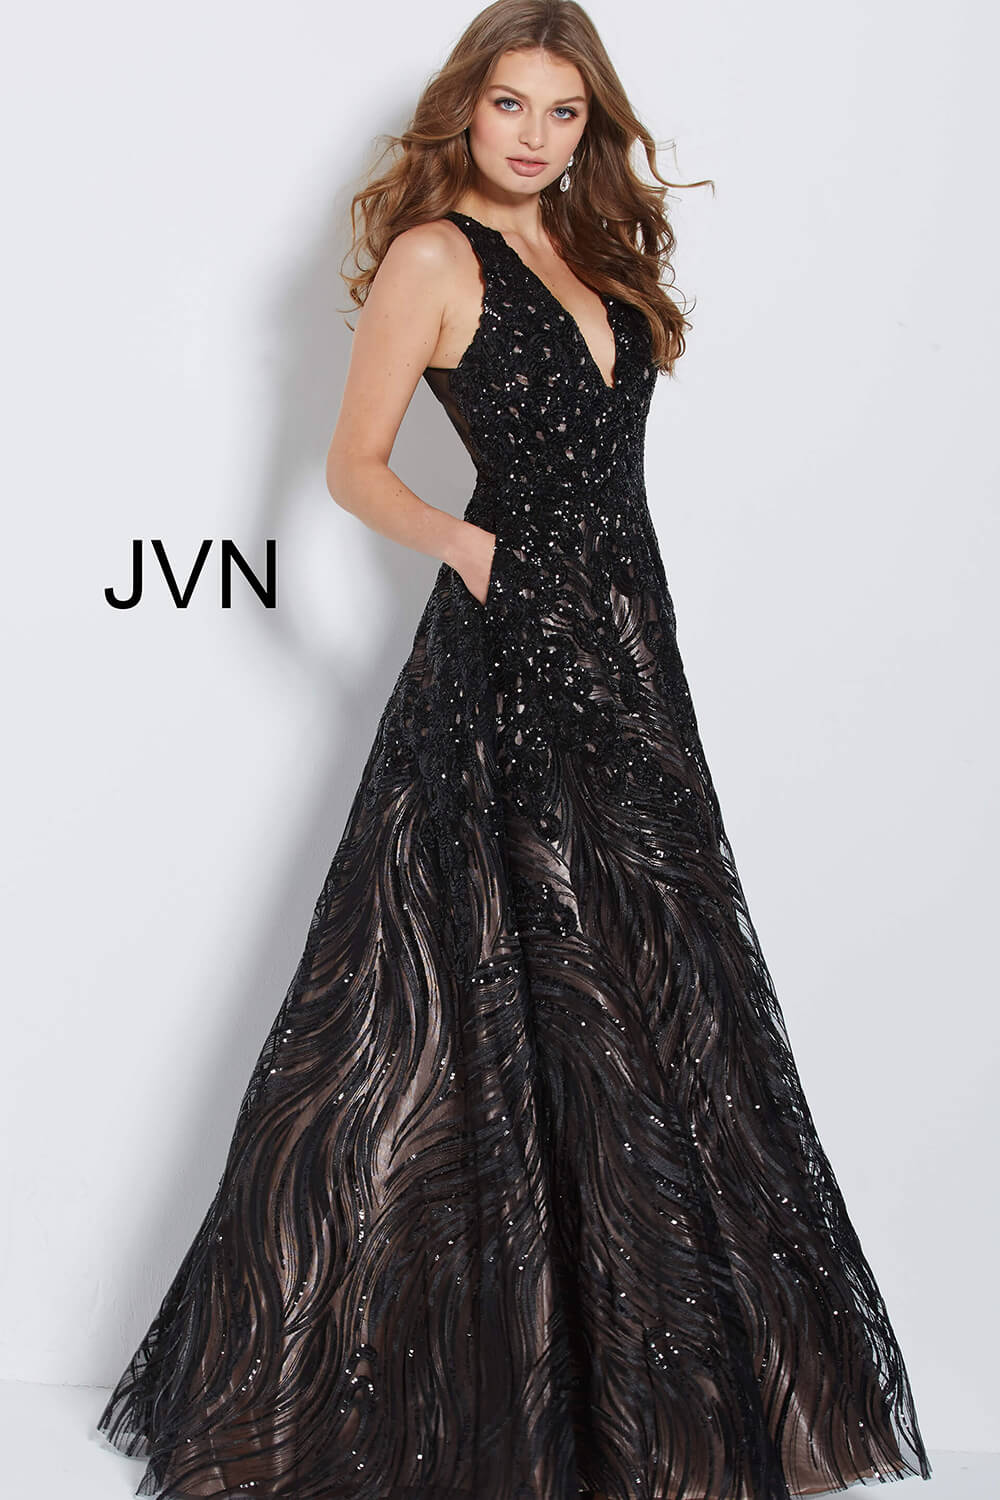 JVN60641 Dress |Navy and Nude Embellished Long Prom Ballgown